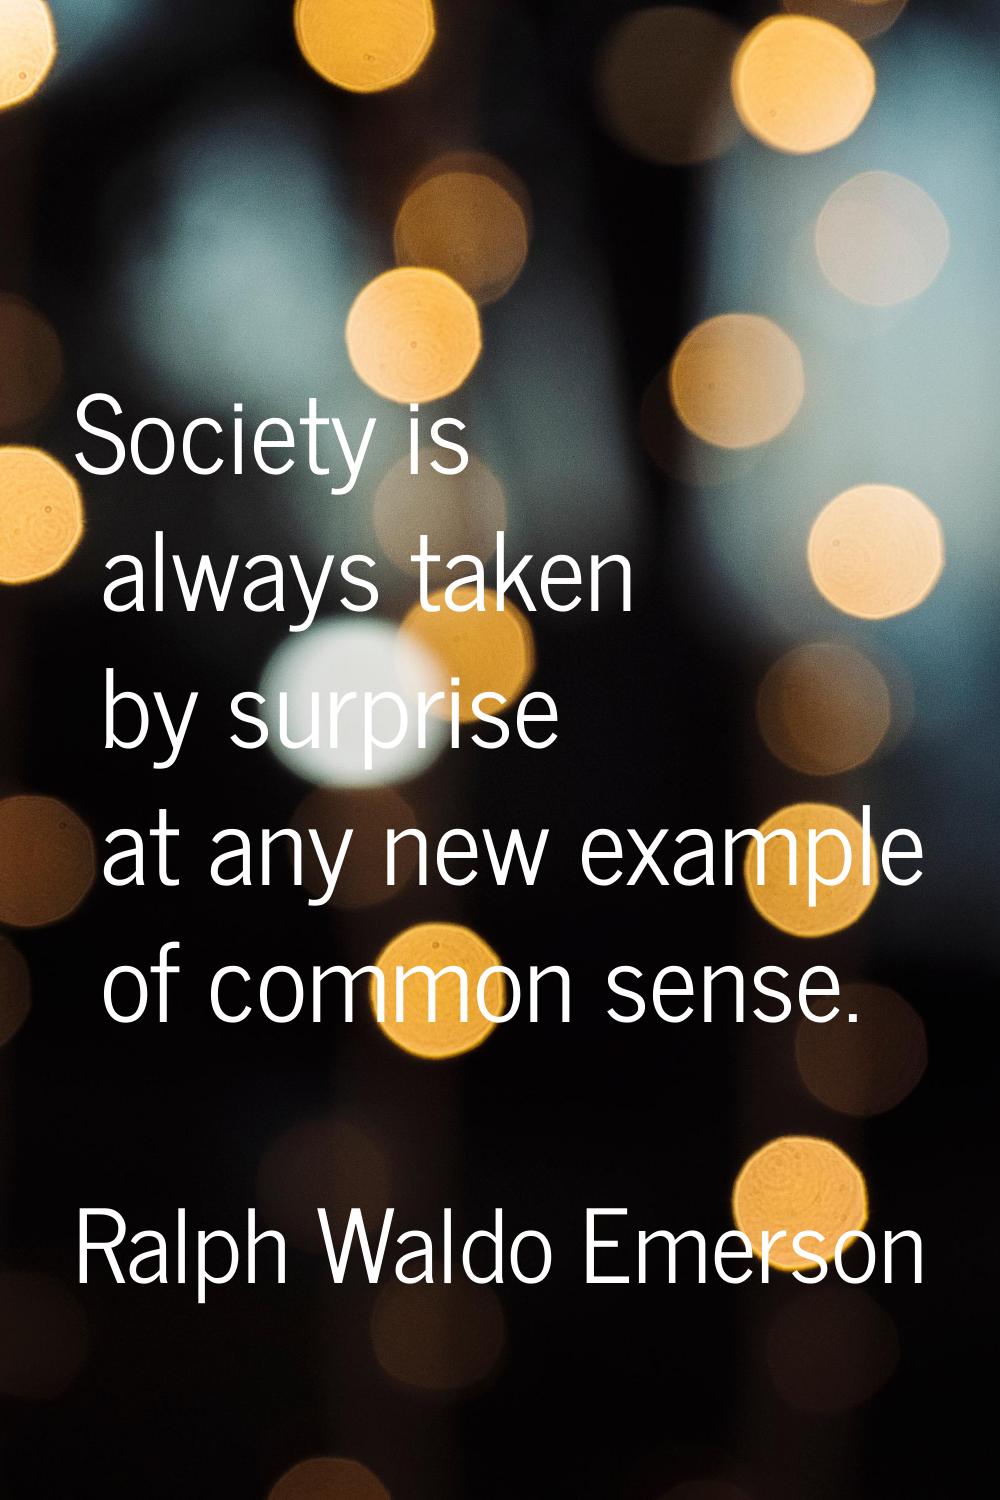 Society is always taken by surprise at any new example of common sense.